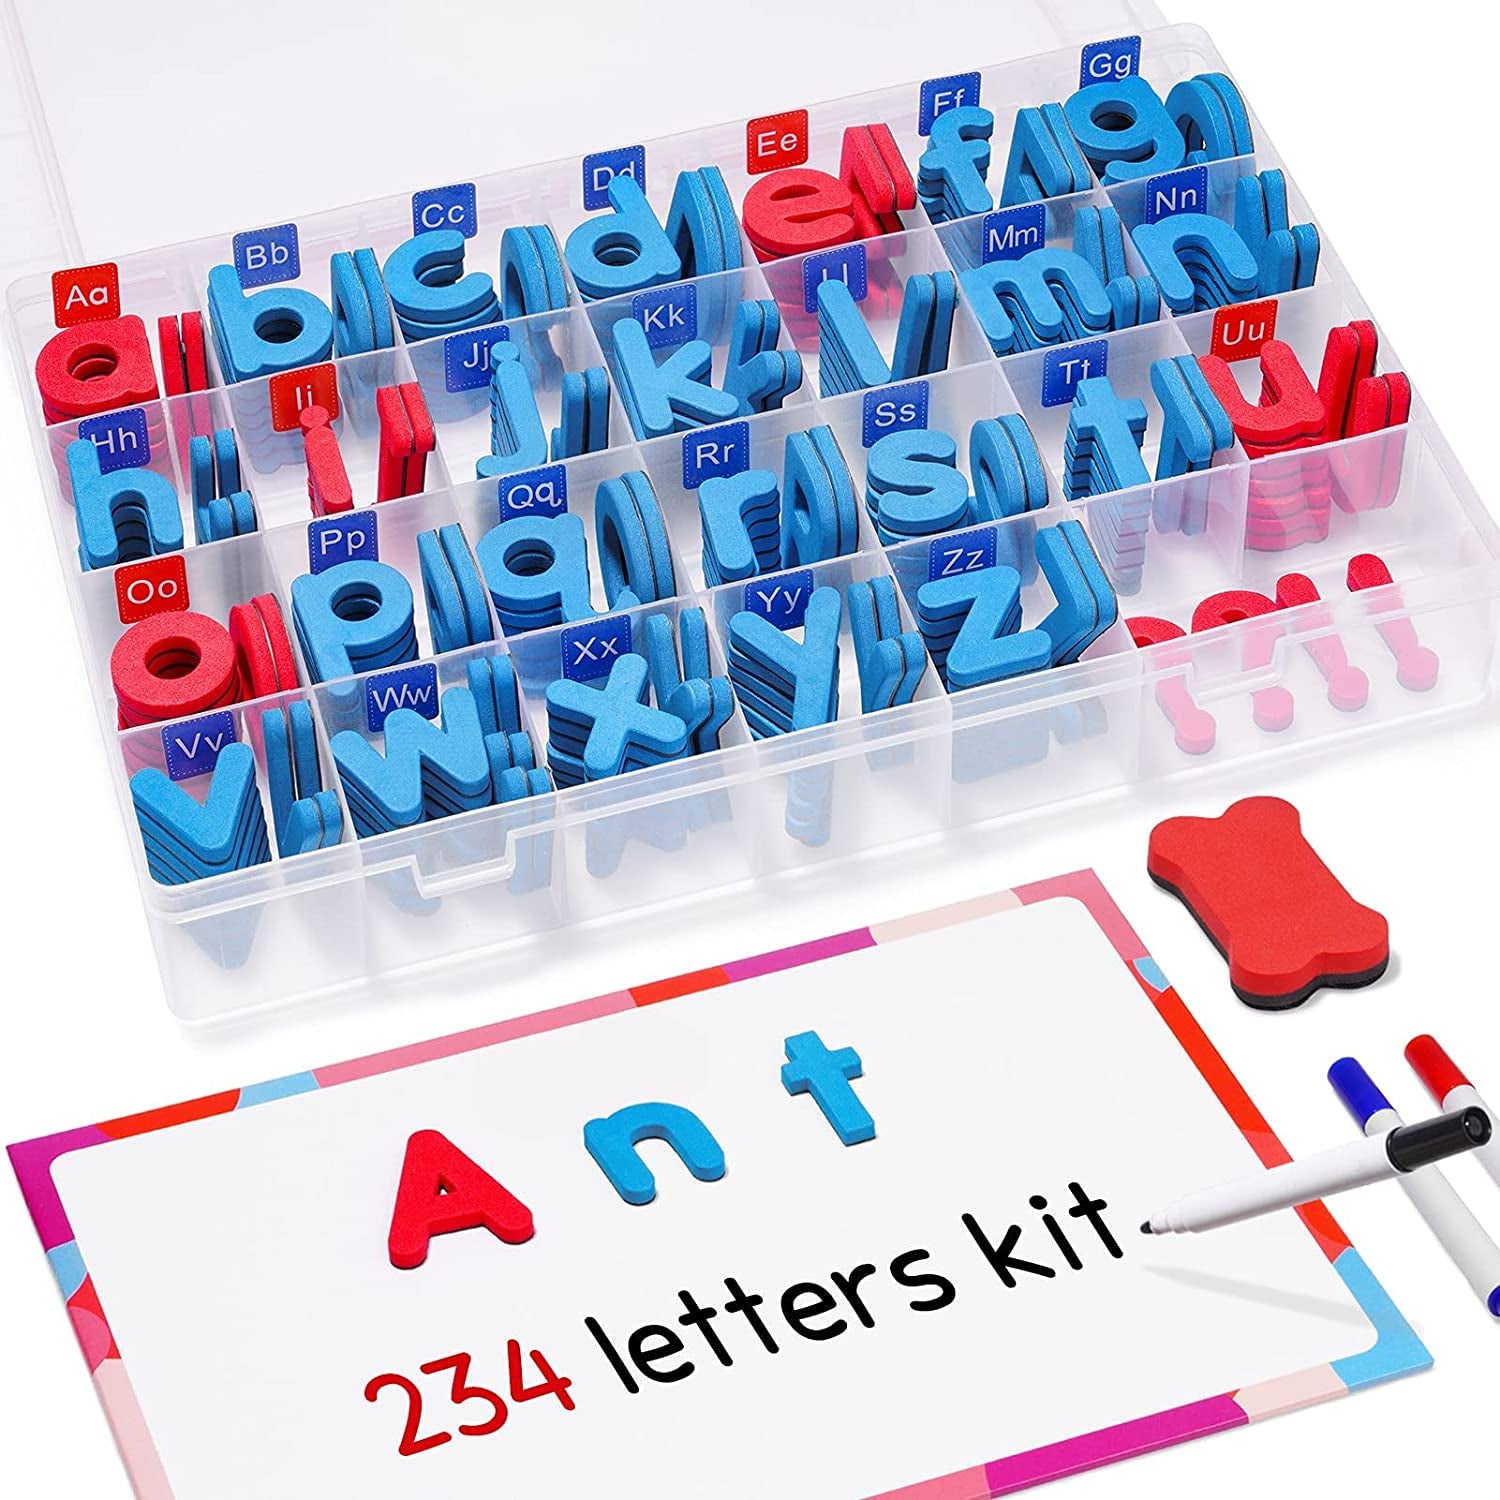 Classroom Magnetic Letters Kit 234 Pcs with Double-Side Magnet Board - Foam Alphabet Letters for Kids Spelling and Learning